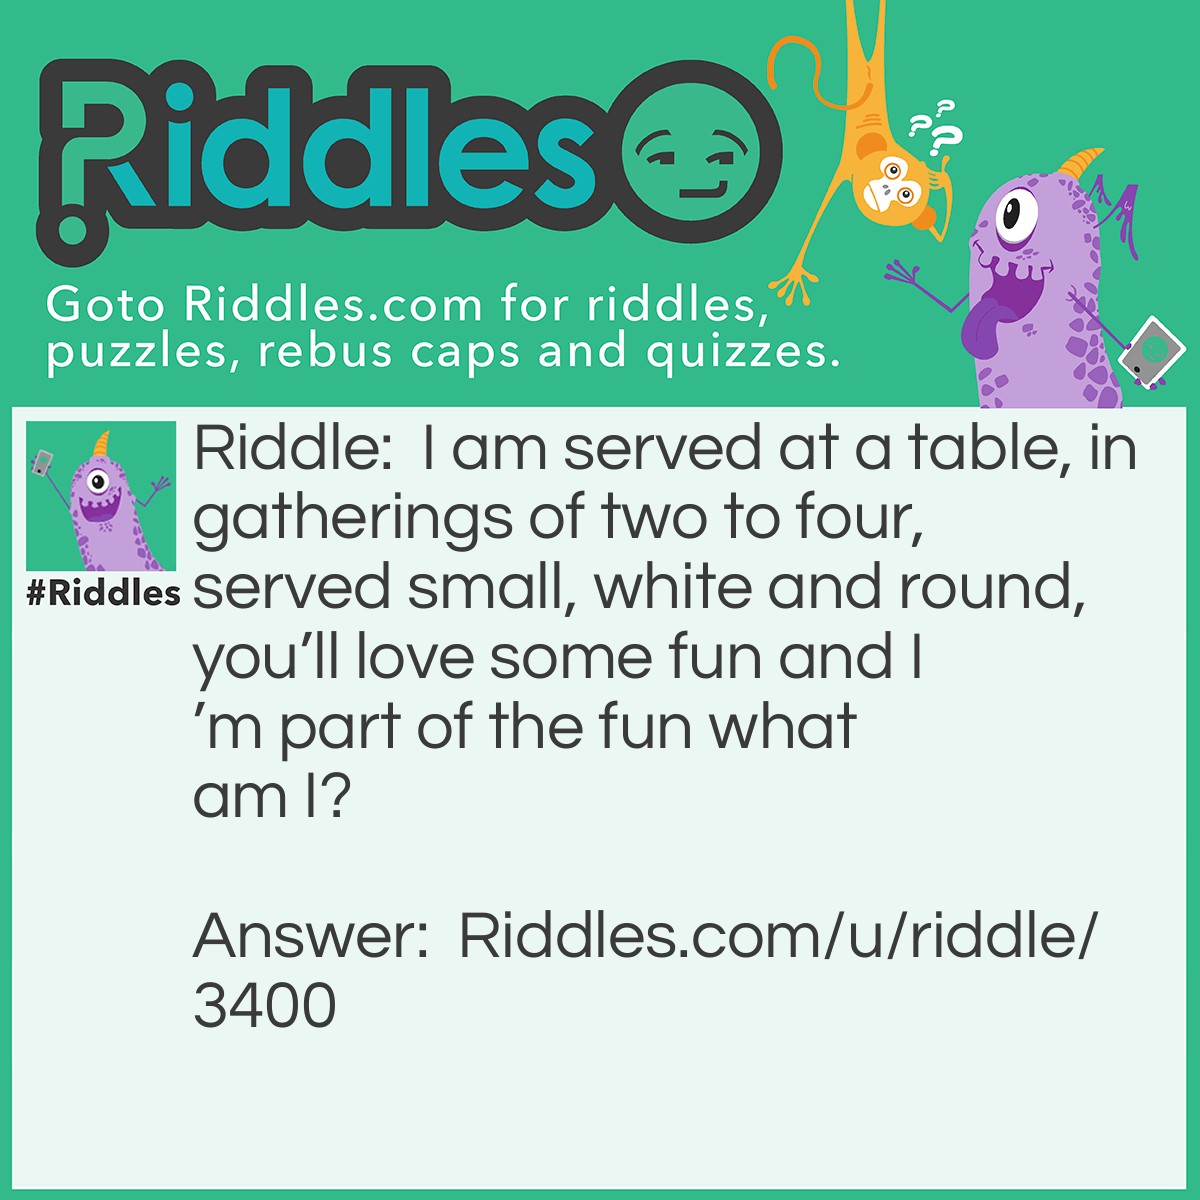 Riddle: I am served at a table, in gatherings of two to four, served small, white and round, you'll love some fun and I'm part of the fun what am I? Answer: Ping Pong Balls.